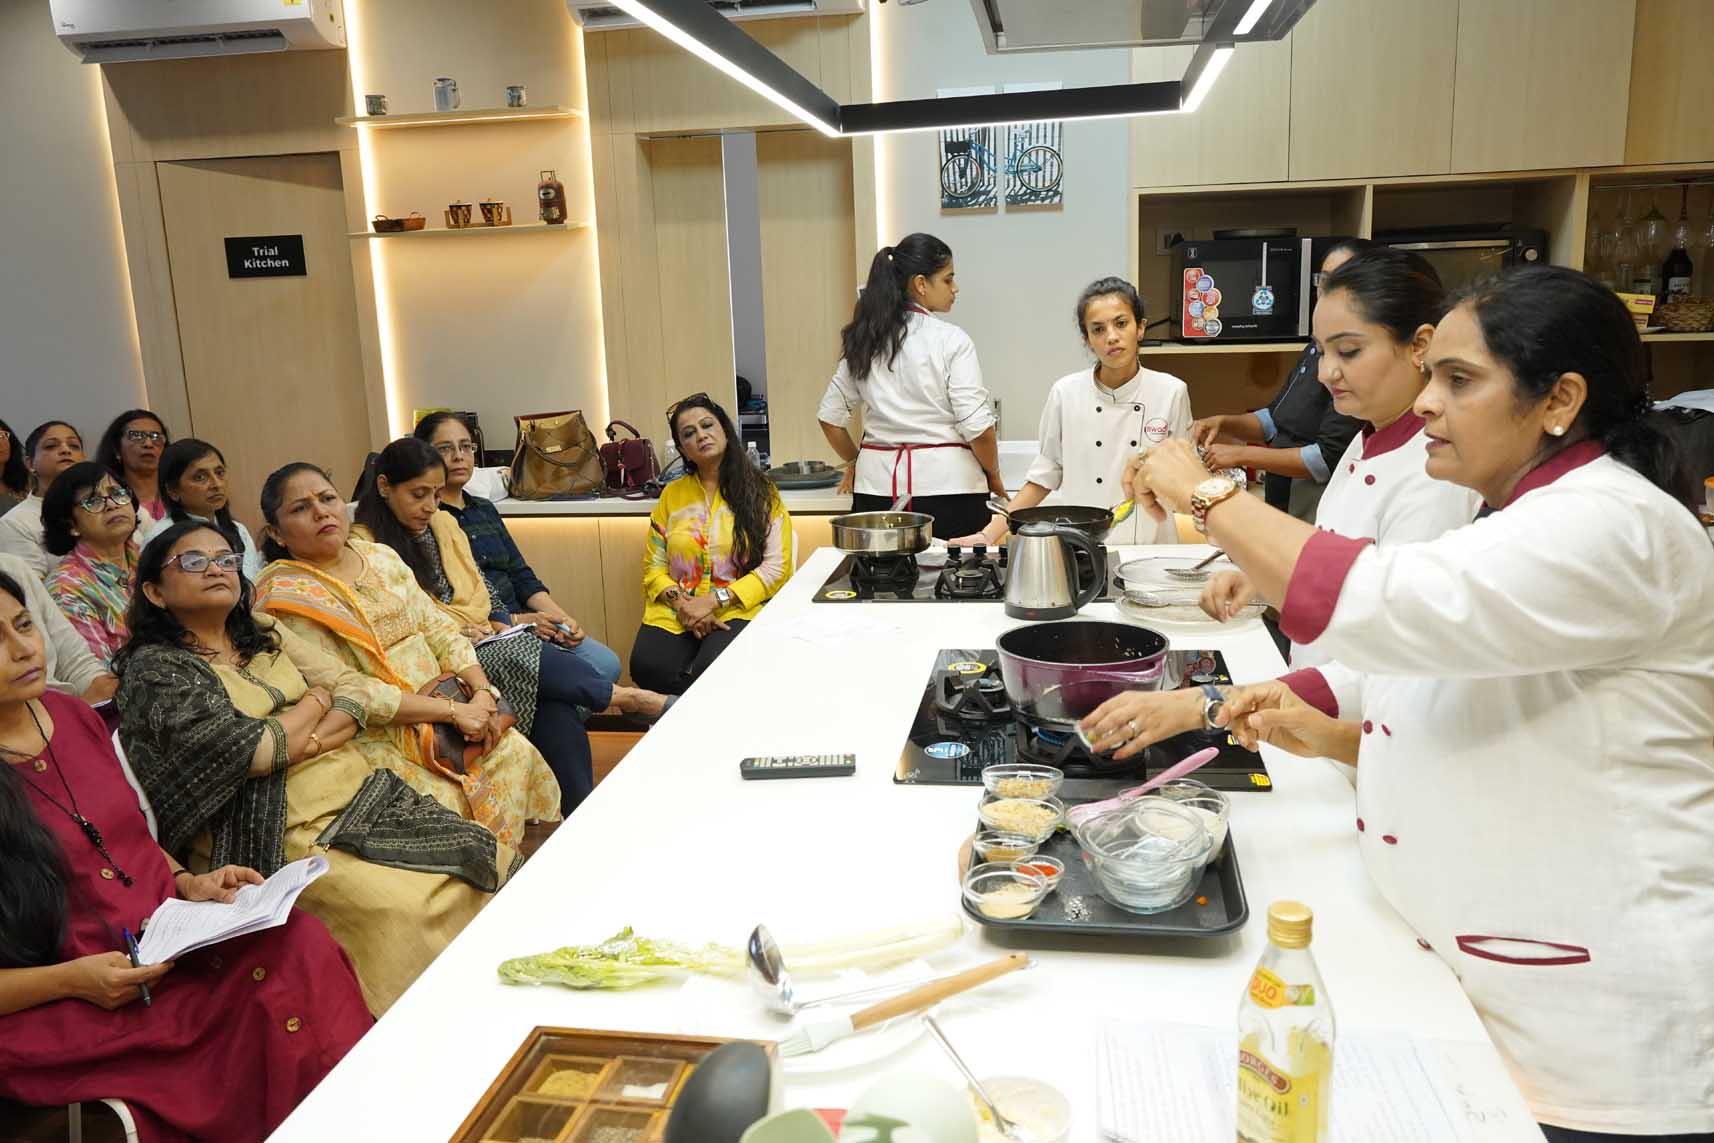 A workshop on 'Live Cooking and Baking' was organized by the Ladies Wing of the Chamber and Swaad Cooking and Baking Institute in joint initiative.